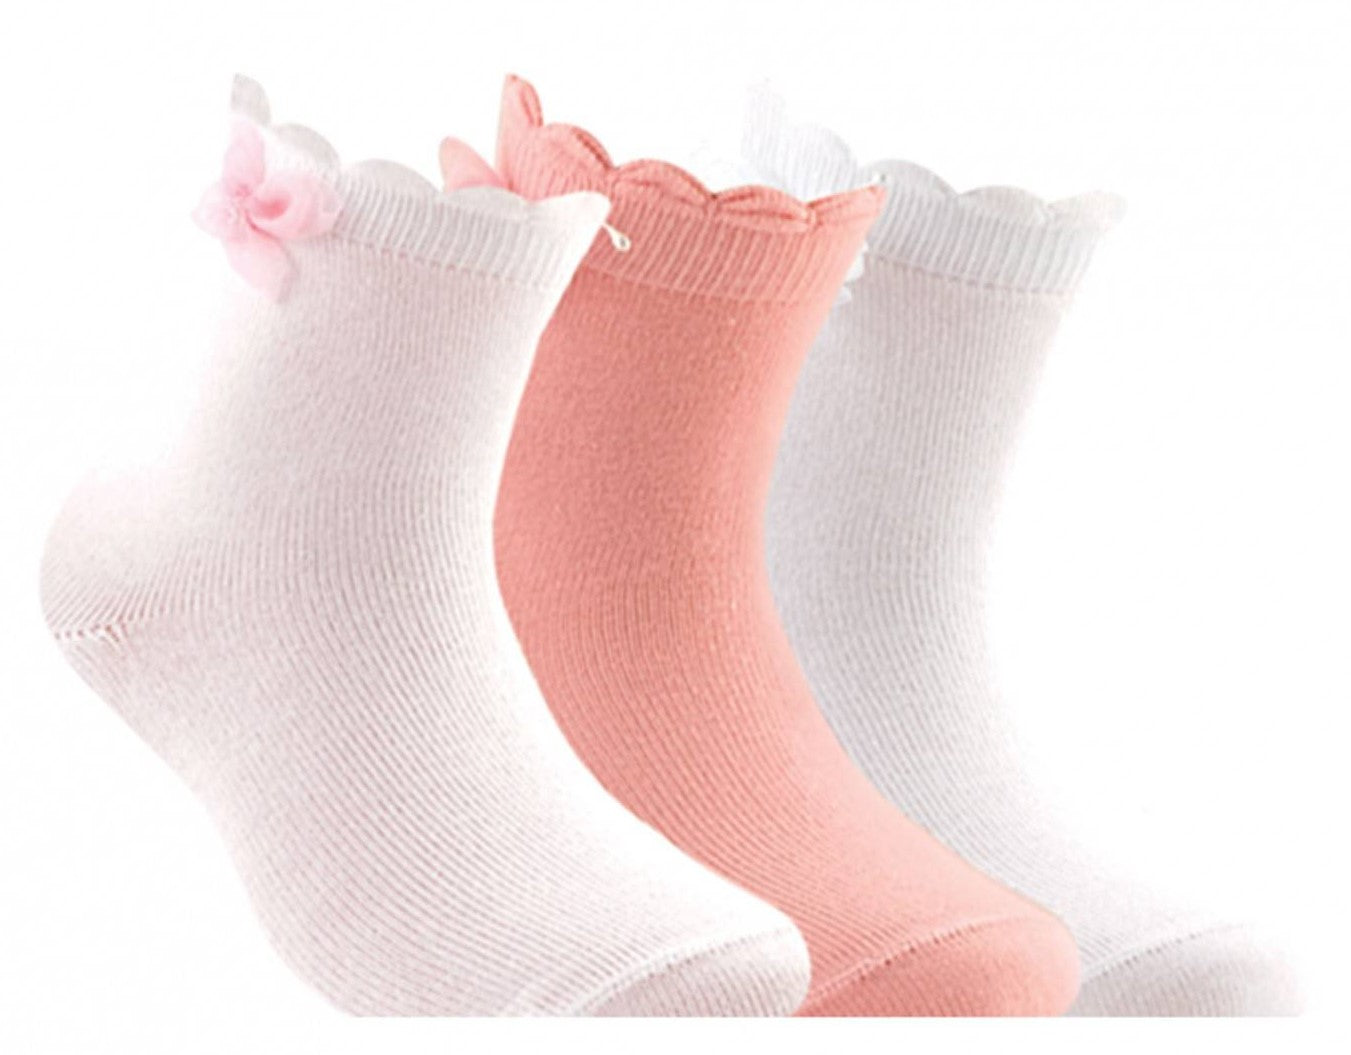 Conte-Kids Tip-Top #7С-50СП(000) - Lot of 2 pairs Cotton Socks For Girls